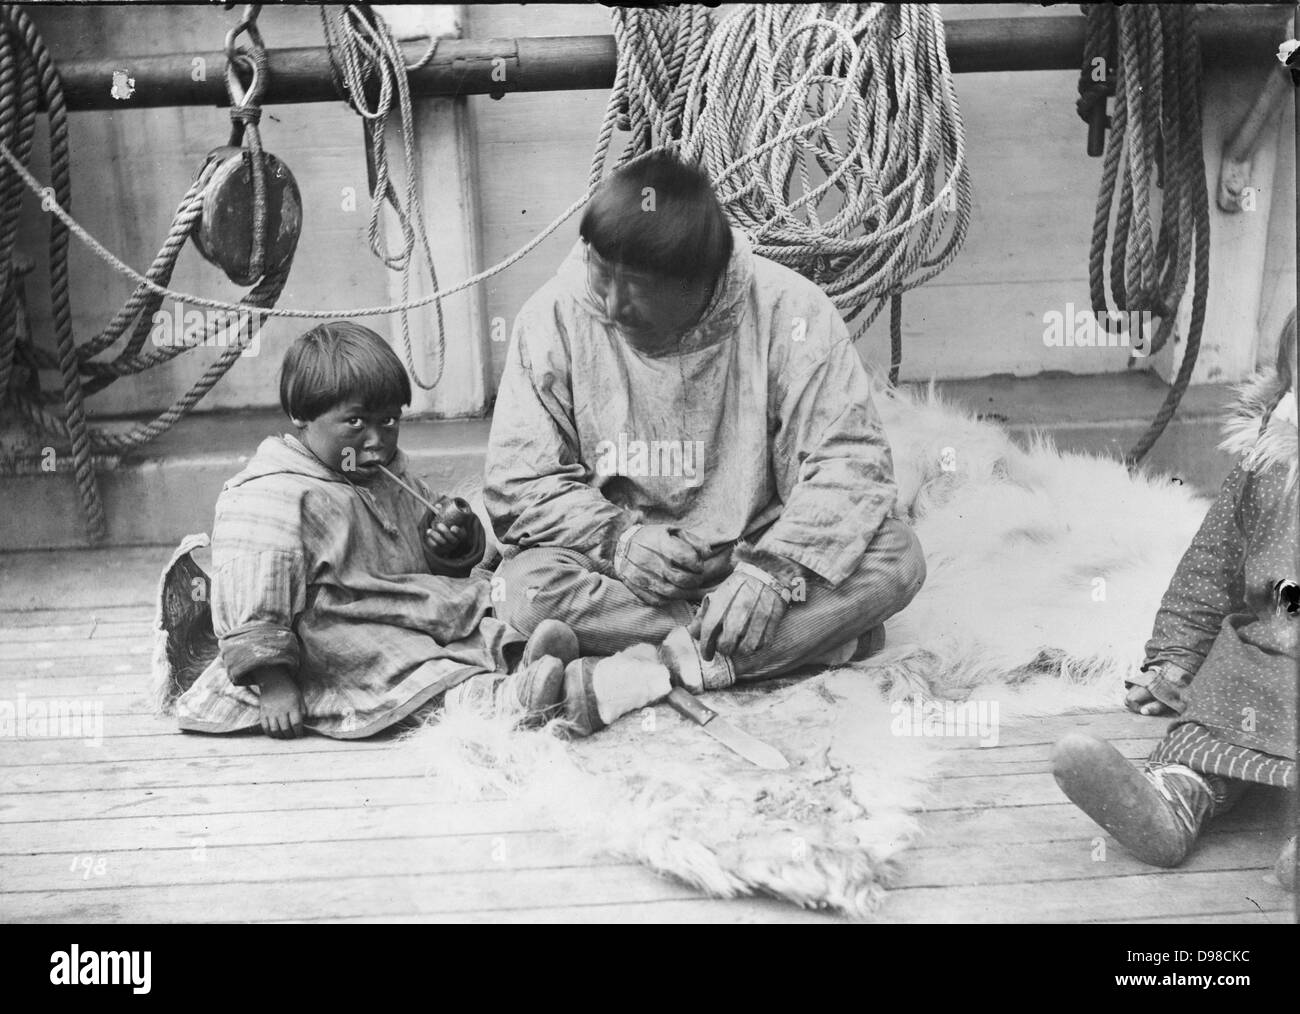 Native American child and man sitting on deck of a ship, possibly the Revenue Cutter 'Bear' during a relief voyage to rescue whalers off the Alaska coast, 1897. Man is showing child how to smoke a pipe. Dr Samuel J. Call (1858-1909) Stock Photo